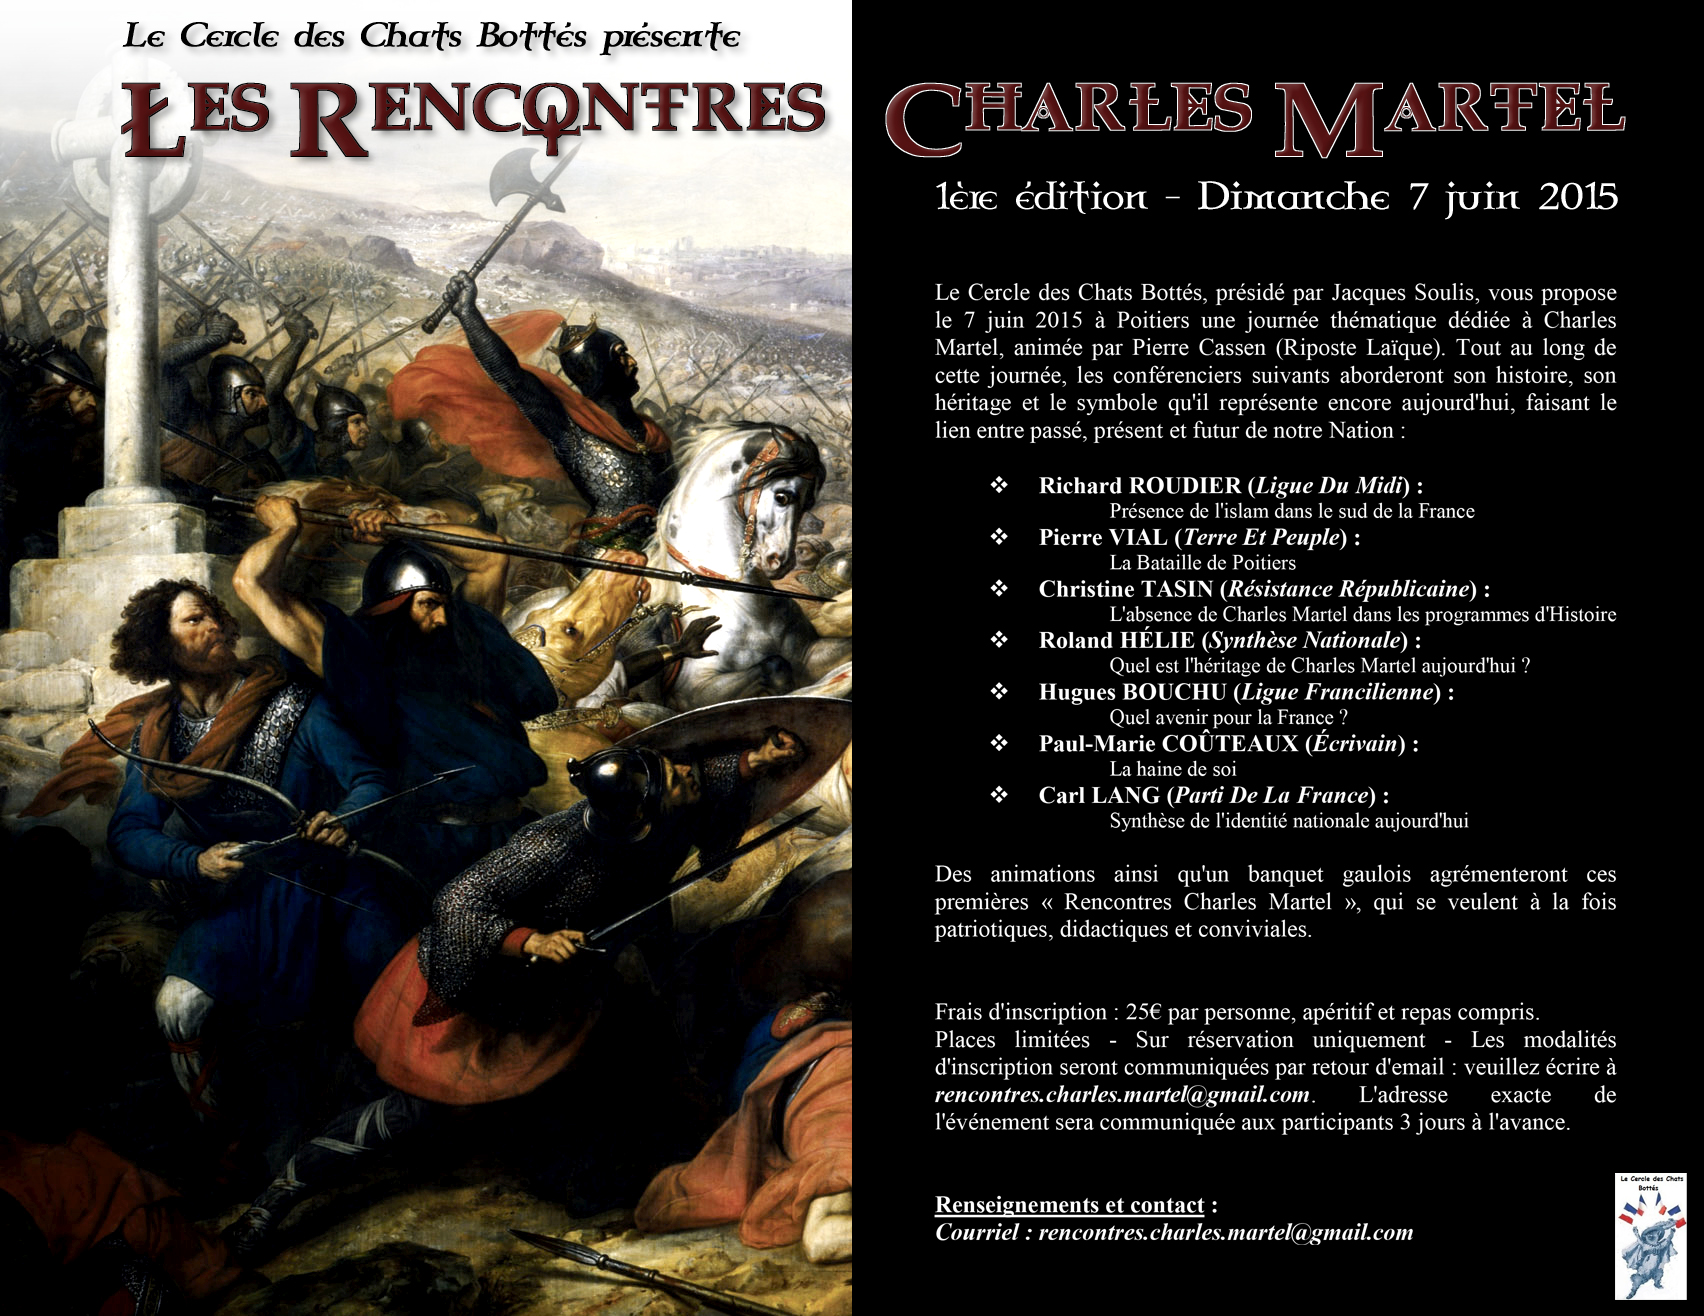 Rencontres Charles Martel pierre vial poitiers